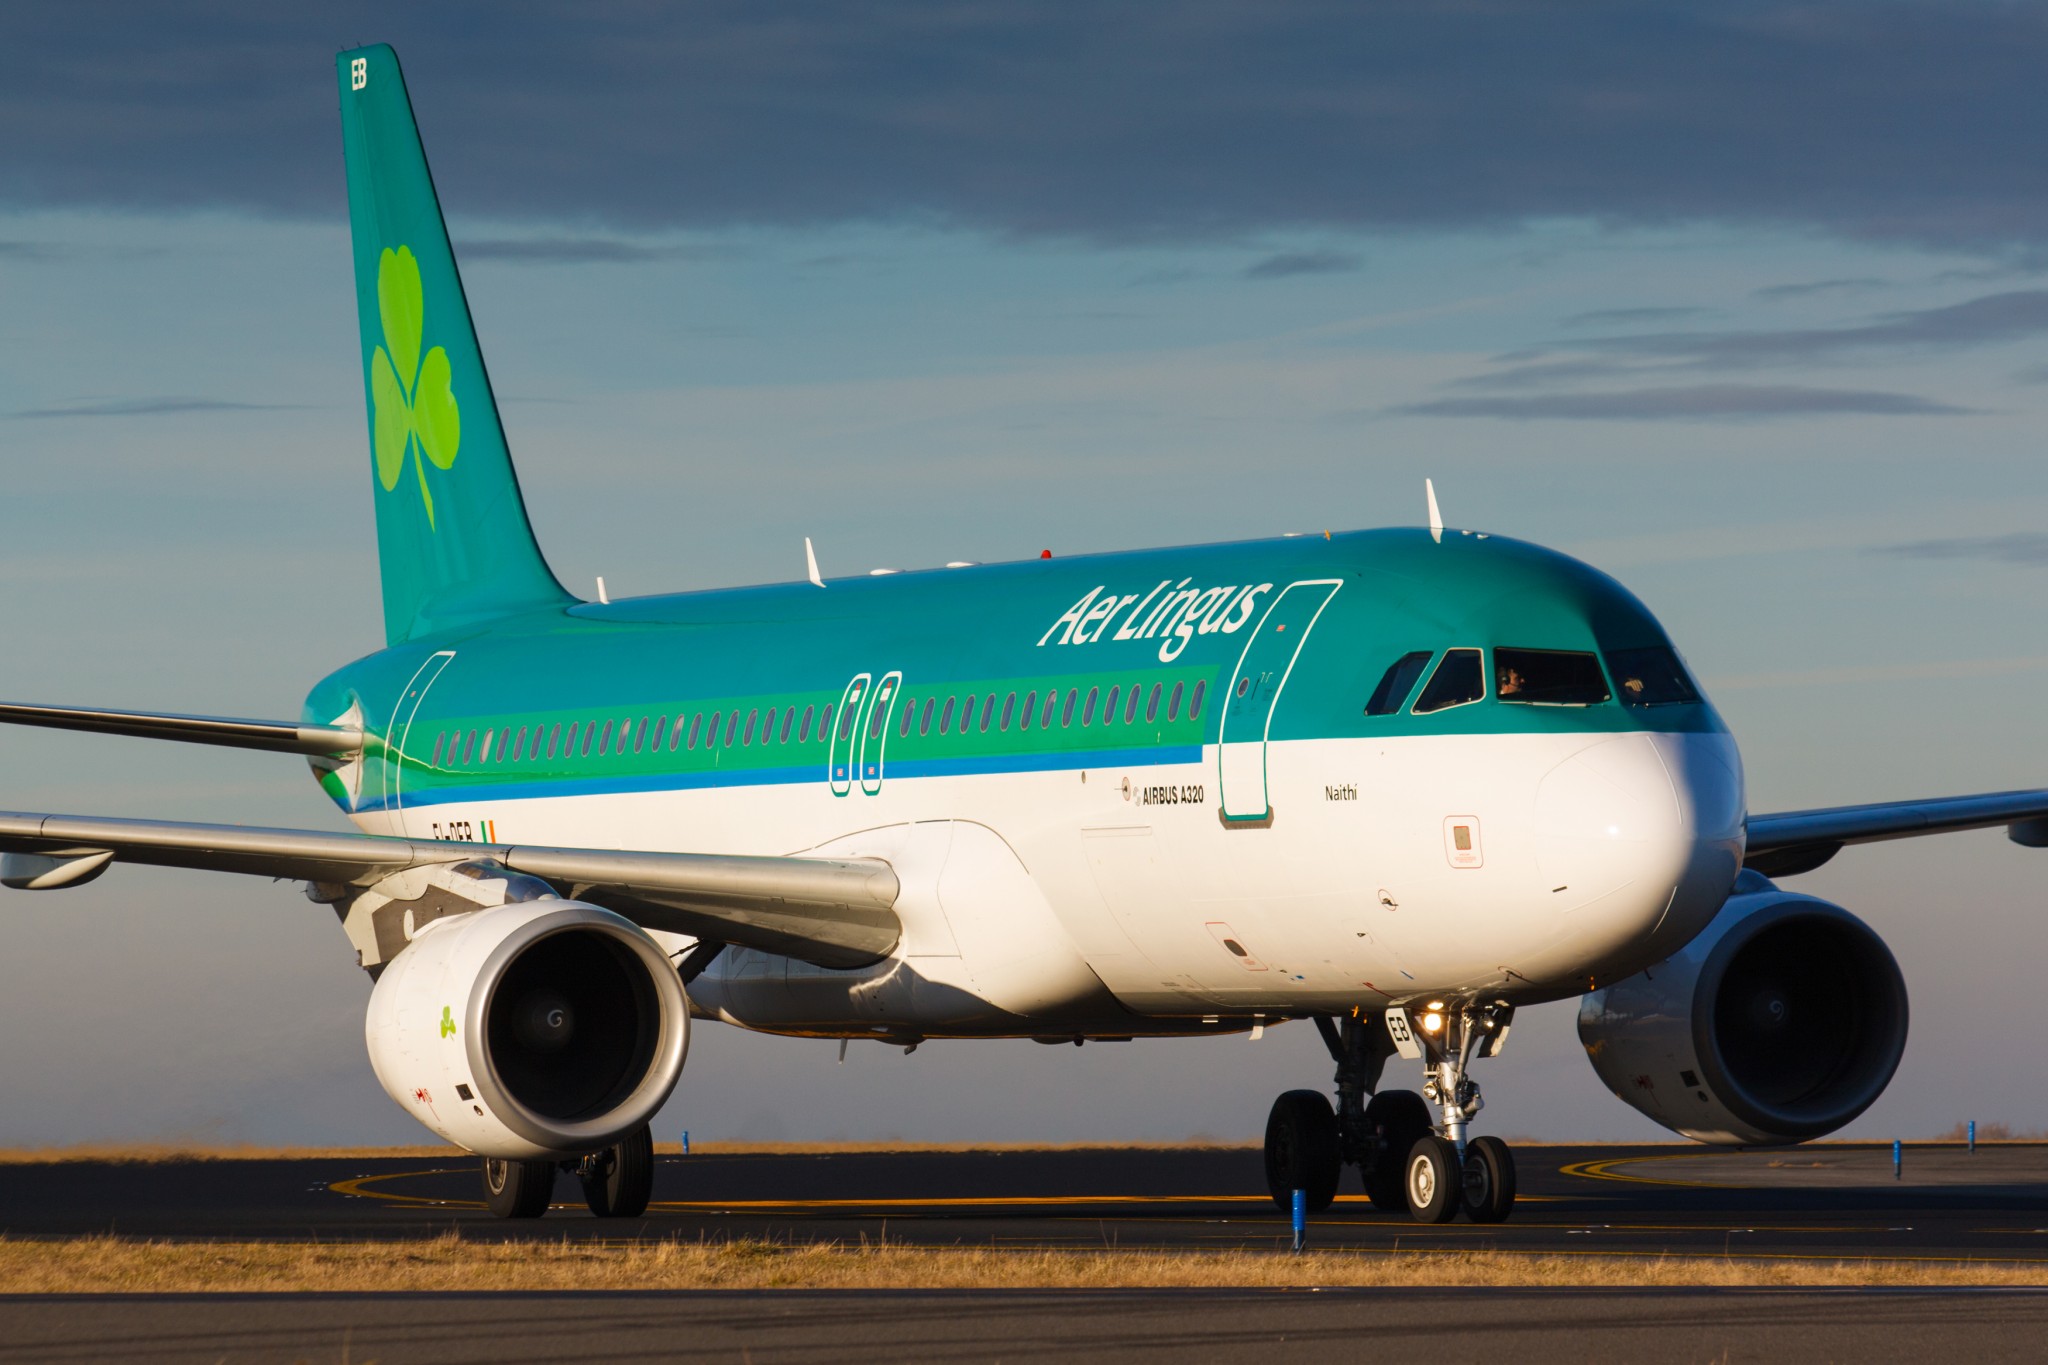 Aer Lingus traffic to US reverting to pre-lockdown norm